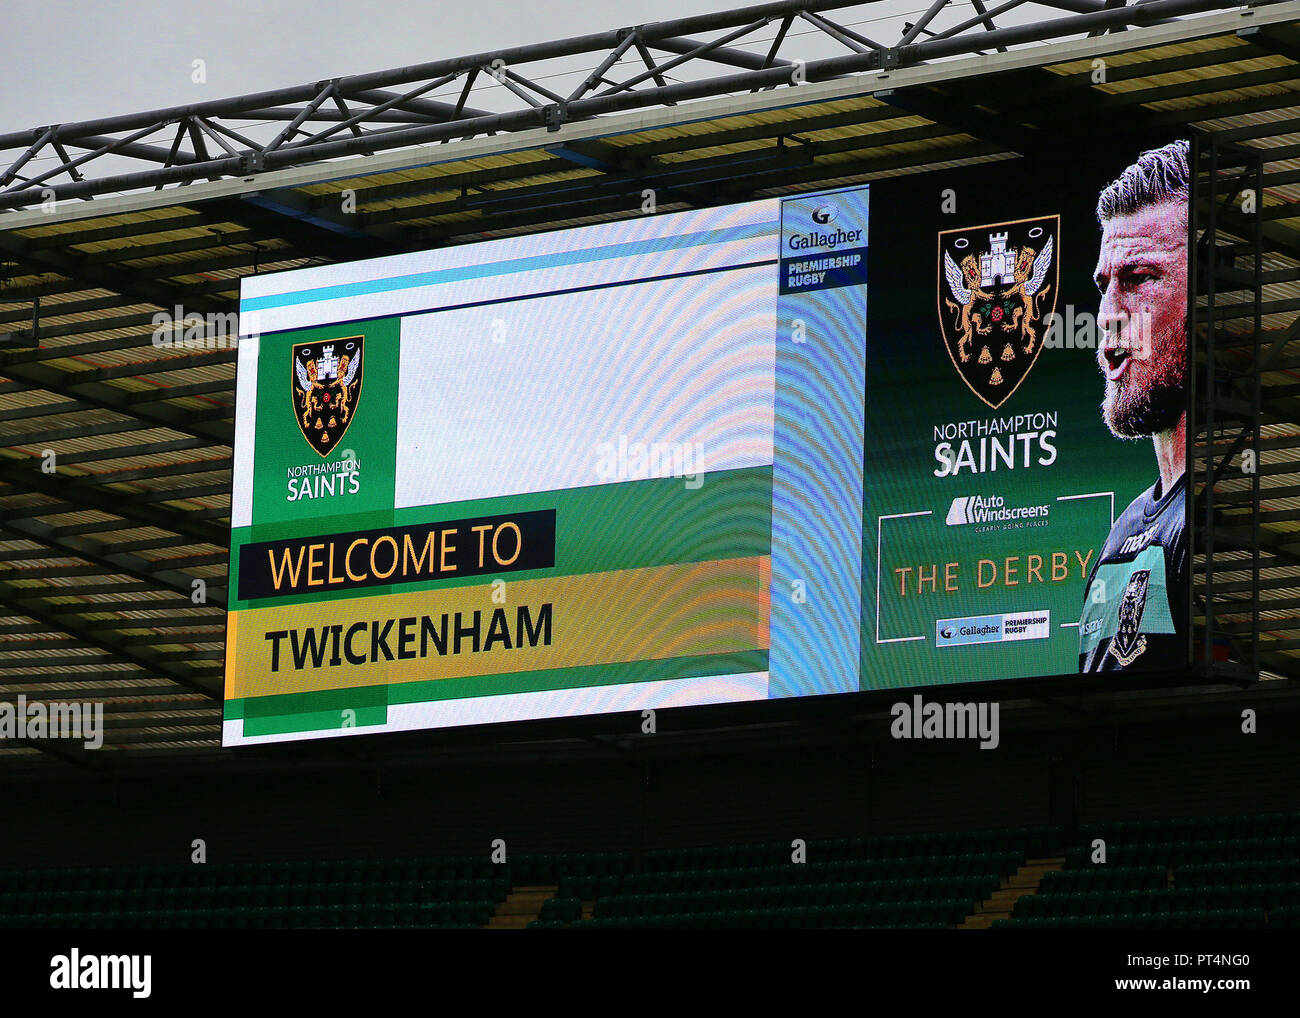 A picture of Rob Horne, who suffered a career ending injury playing for Northampton Saints in the last Midlands derby match between Northampton Saints and Leicester, is featured on the digital scoreboard before the Gallagher Premiership match at Twickenham Stadium, London. Stock Photo